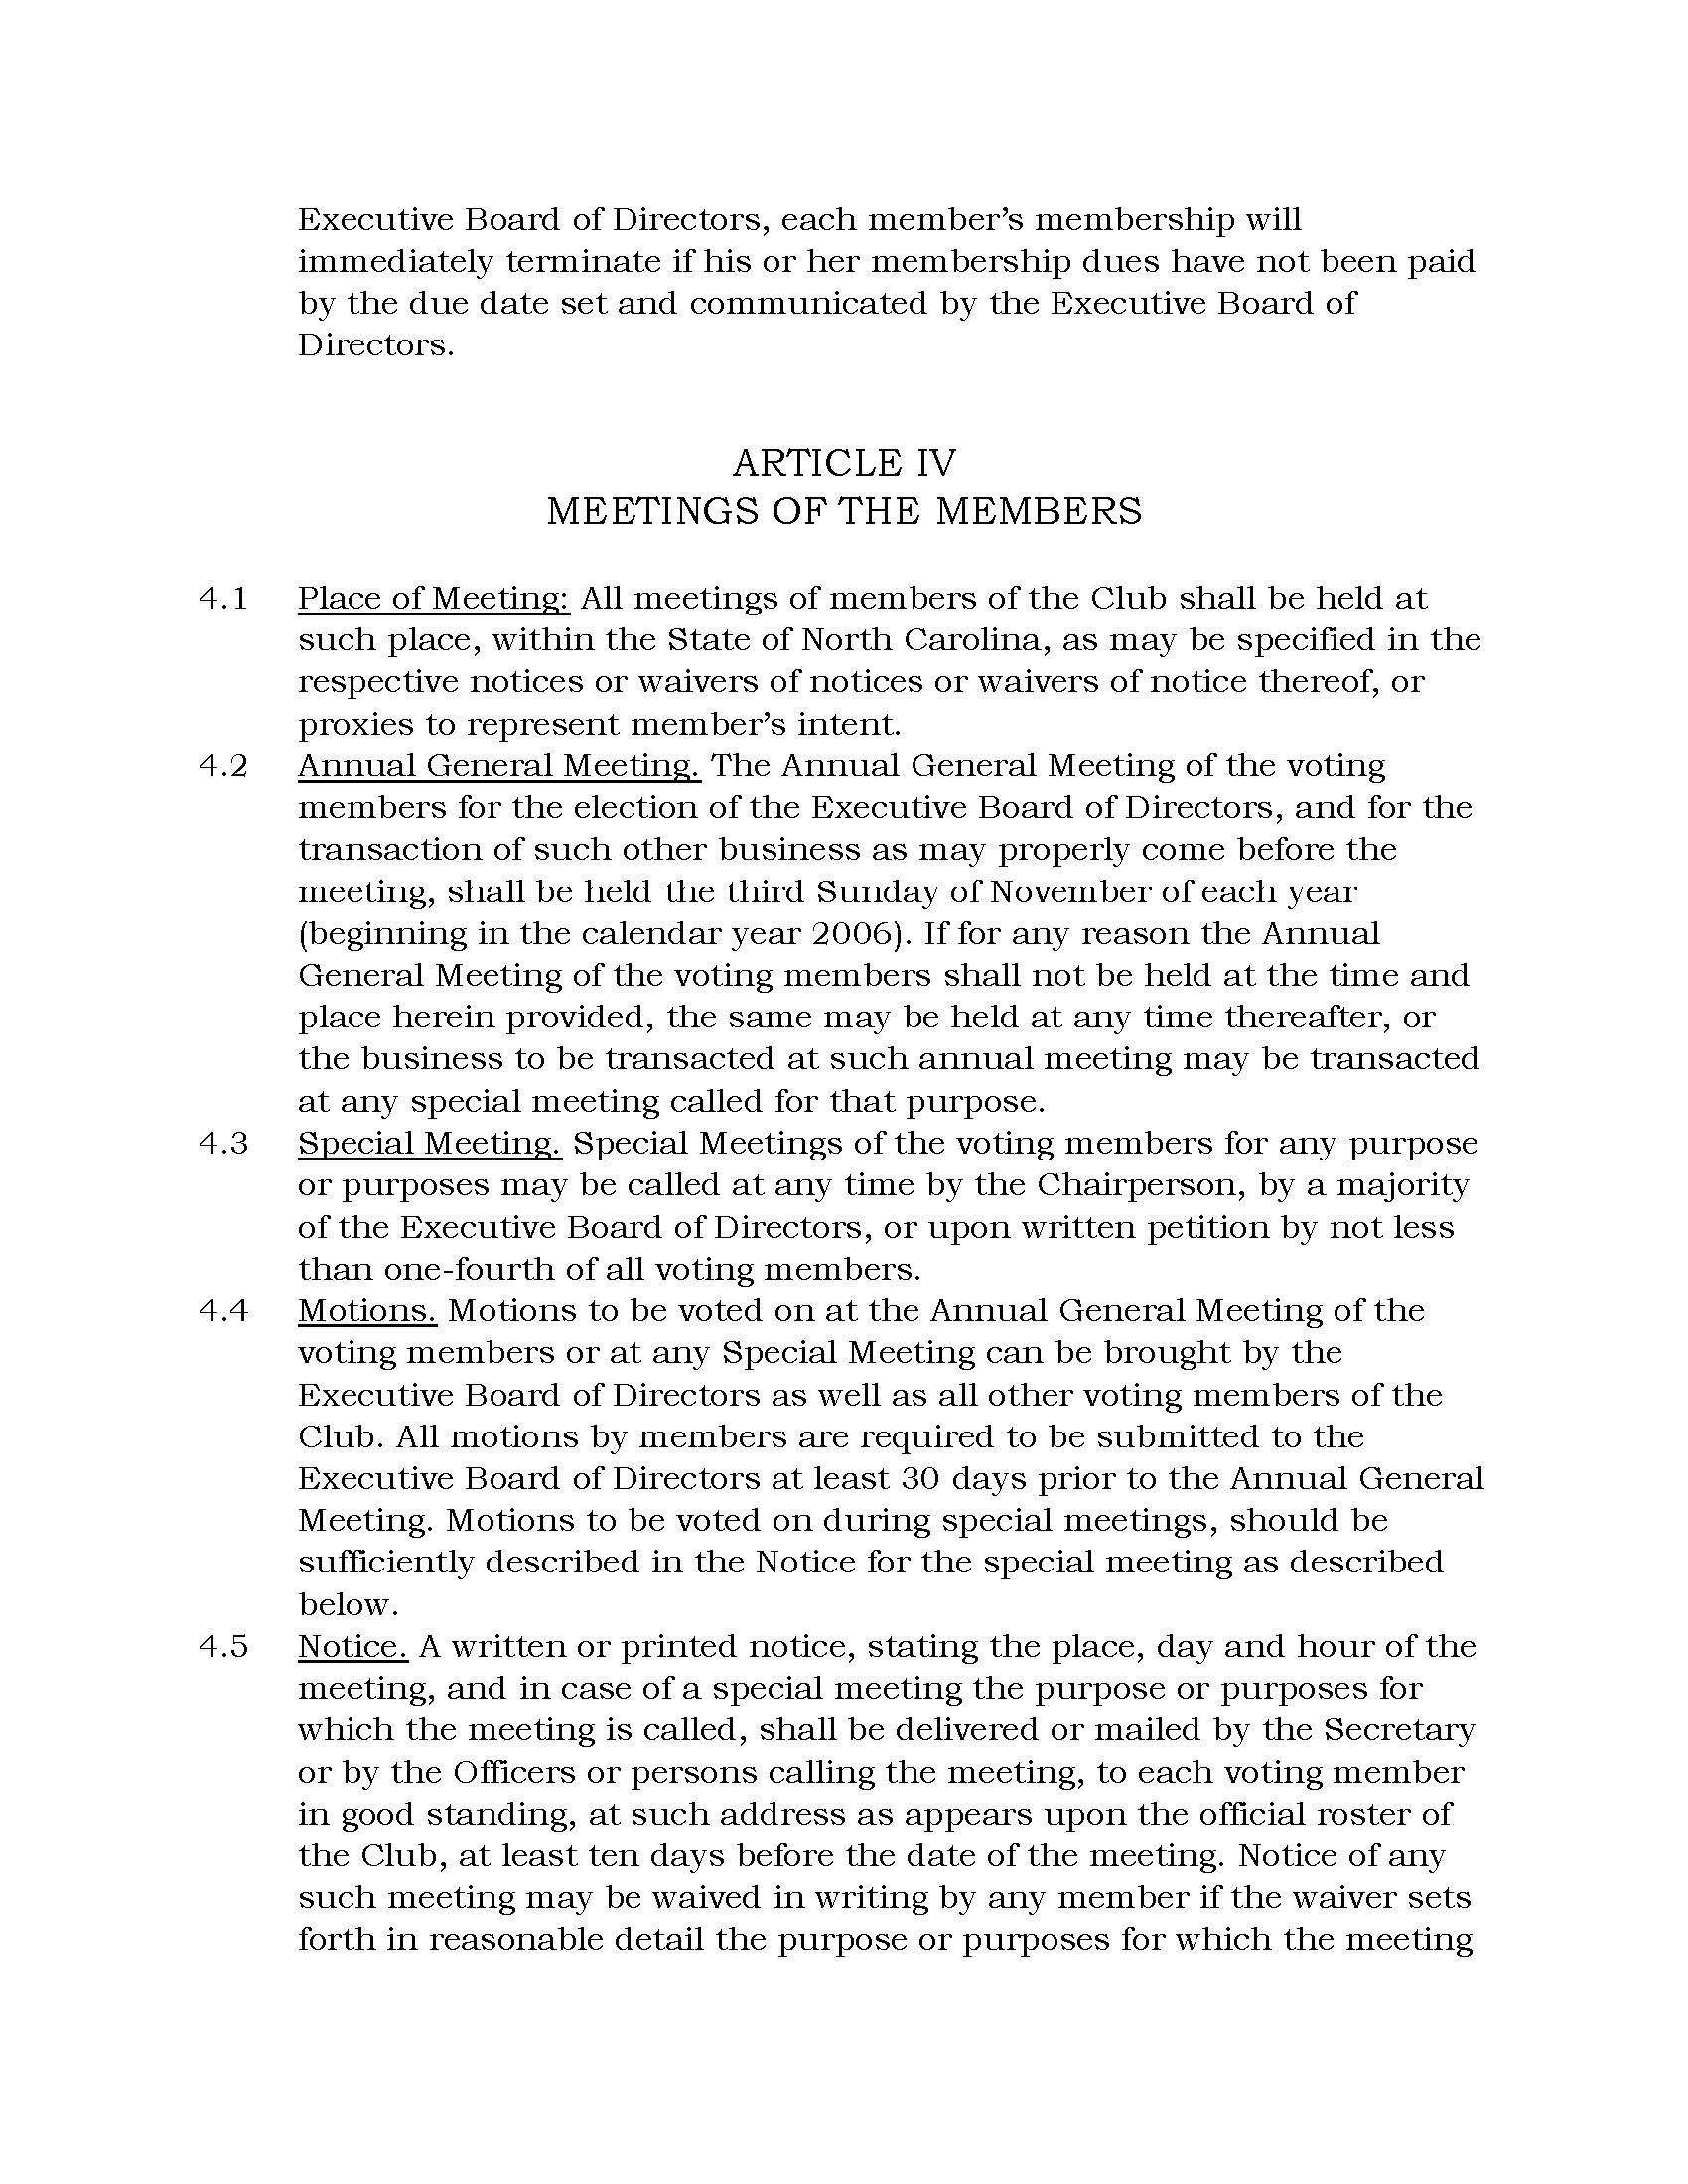 Bylaws of Charlotte James Connolly Gaelic Football Club_12.12.21_Page_05.jpg